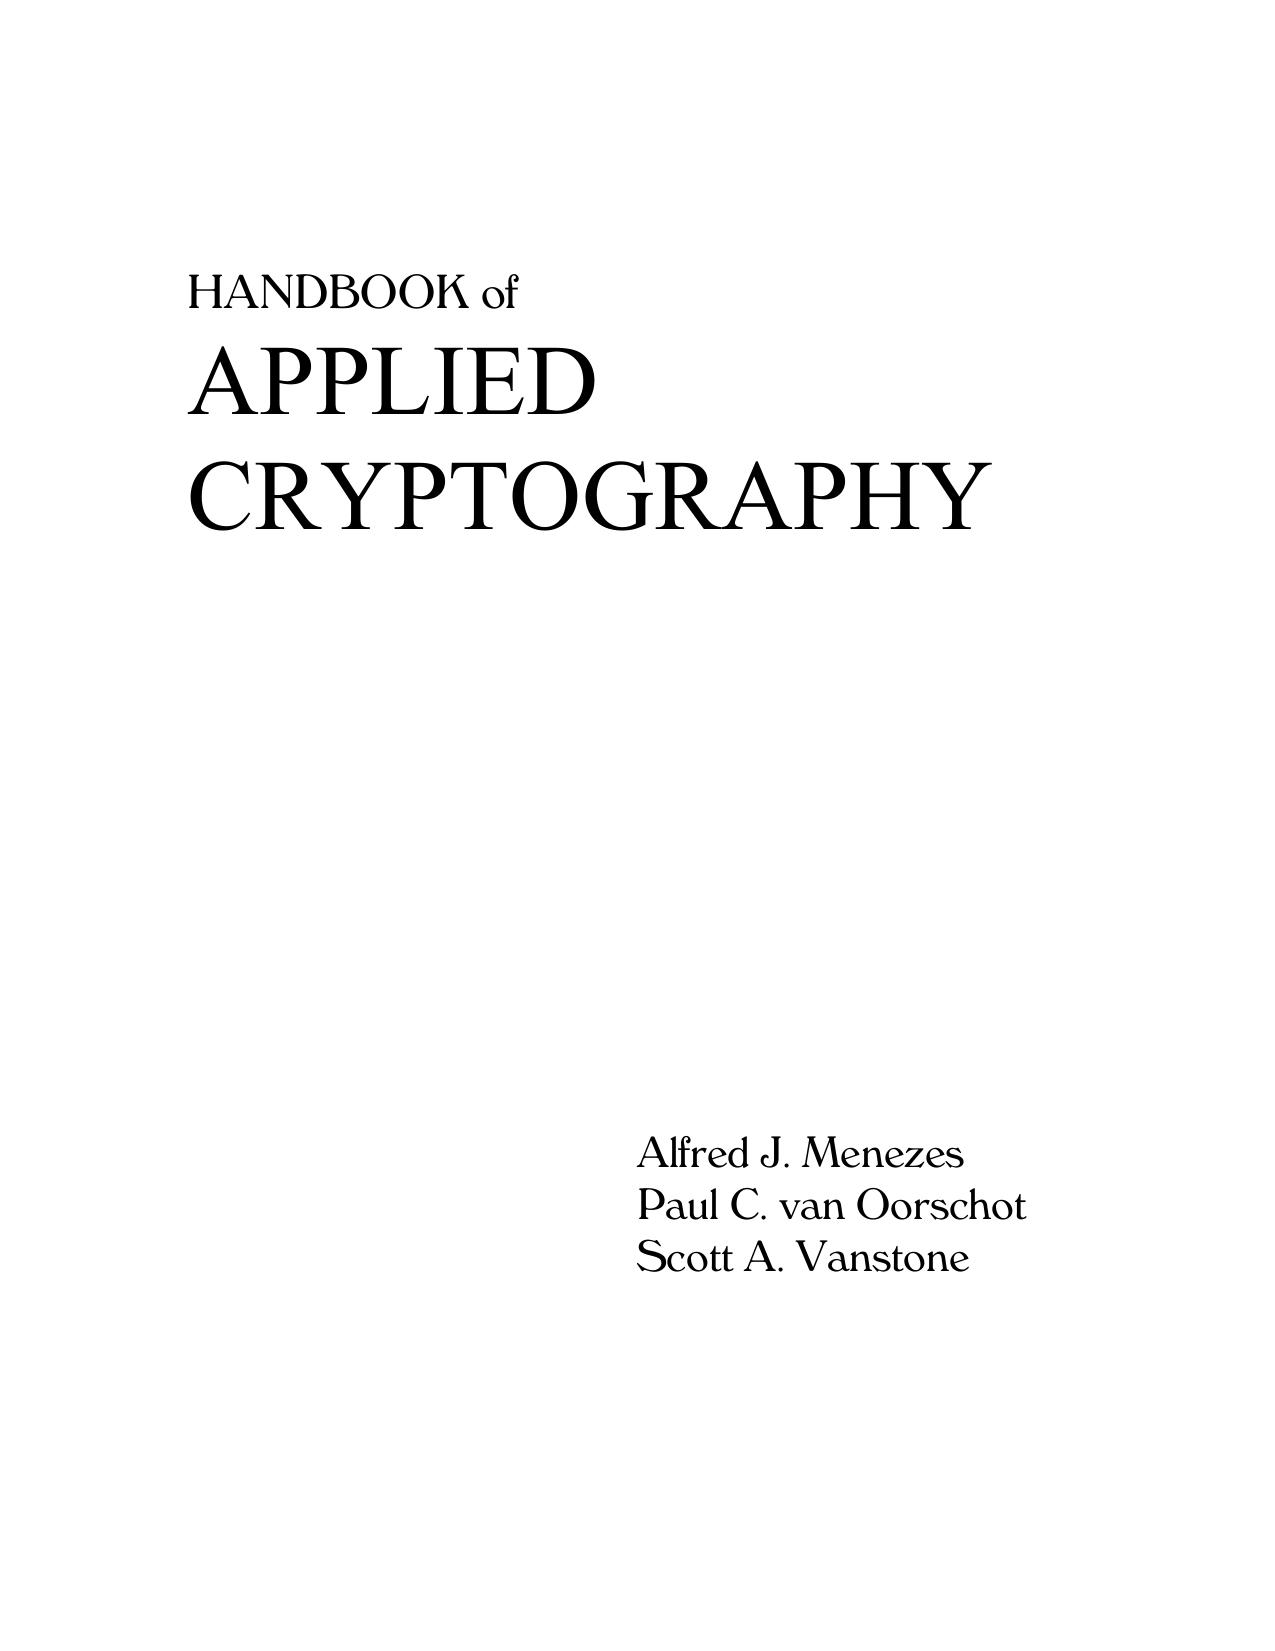 Handbook of Applied Cryptography 4ward by RL Rivest